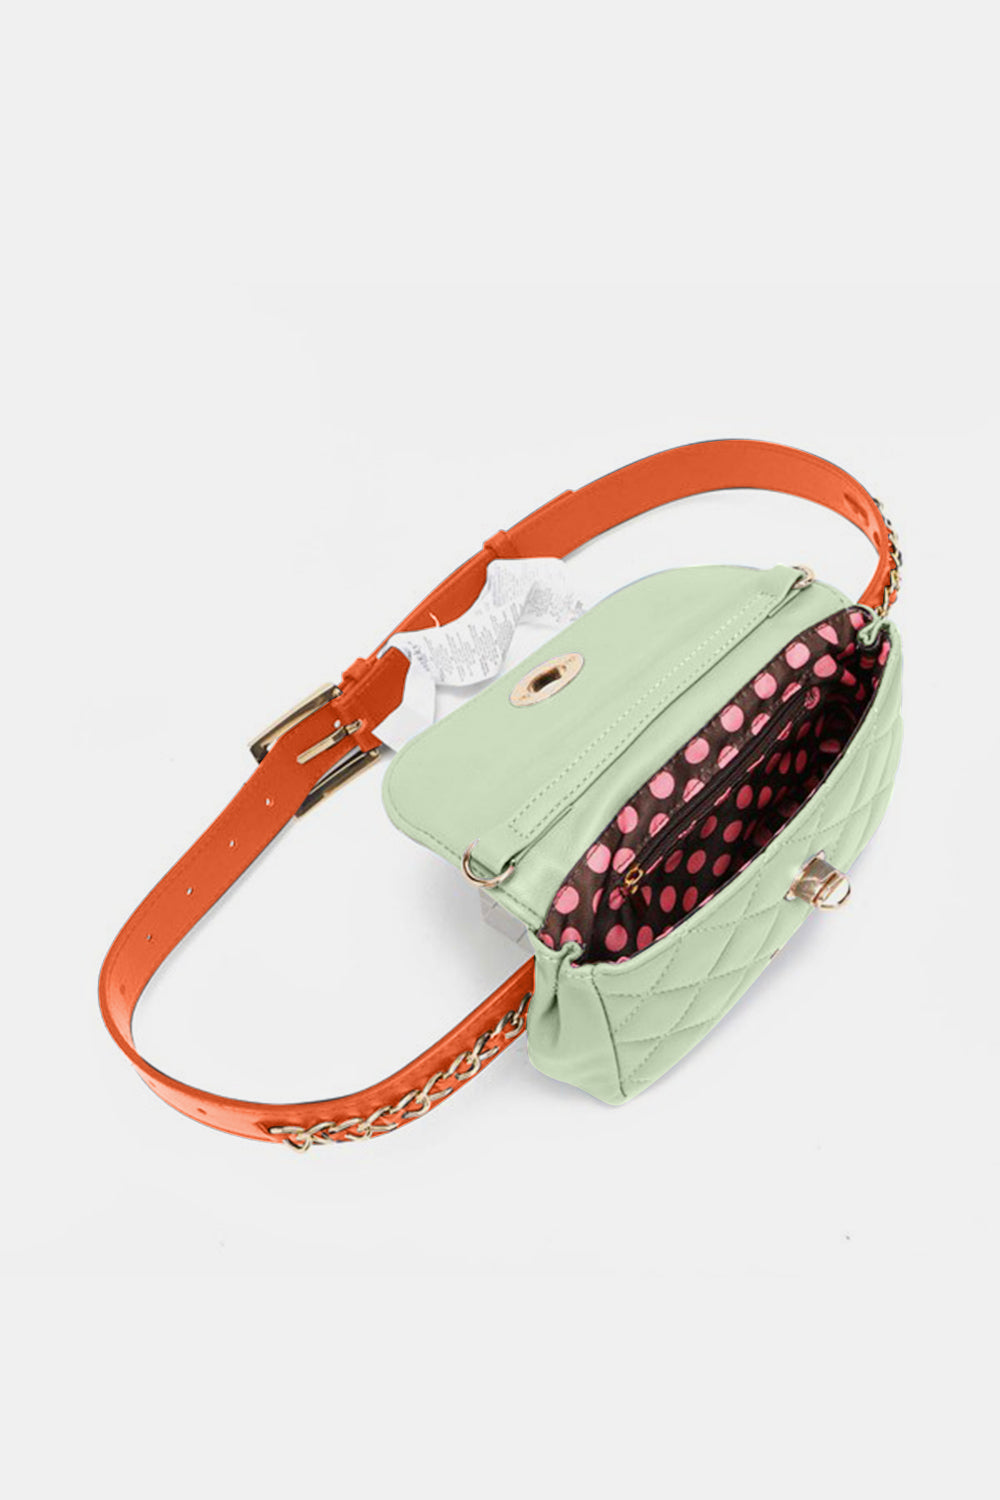 Nicole Lee USA Quilted Fanny Pack - AllIn Computer